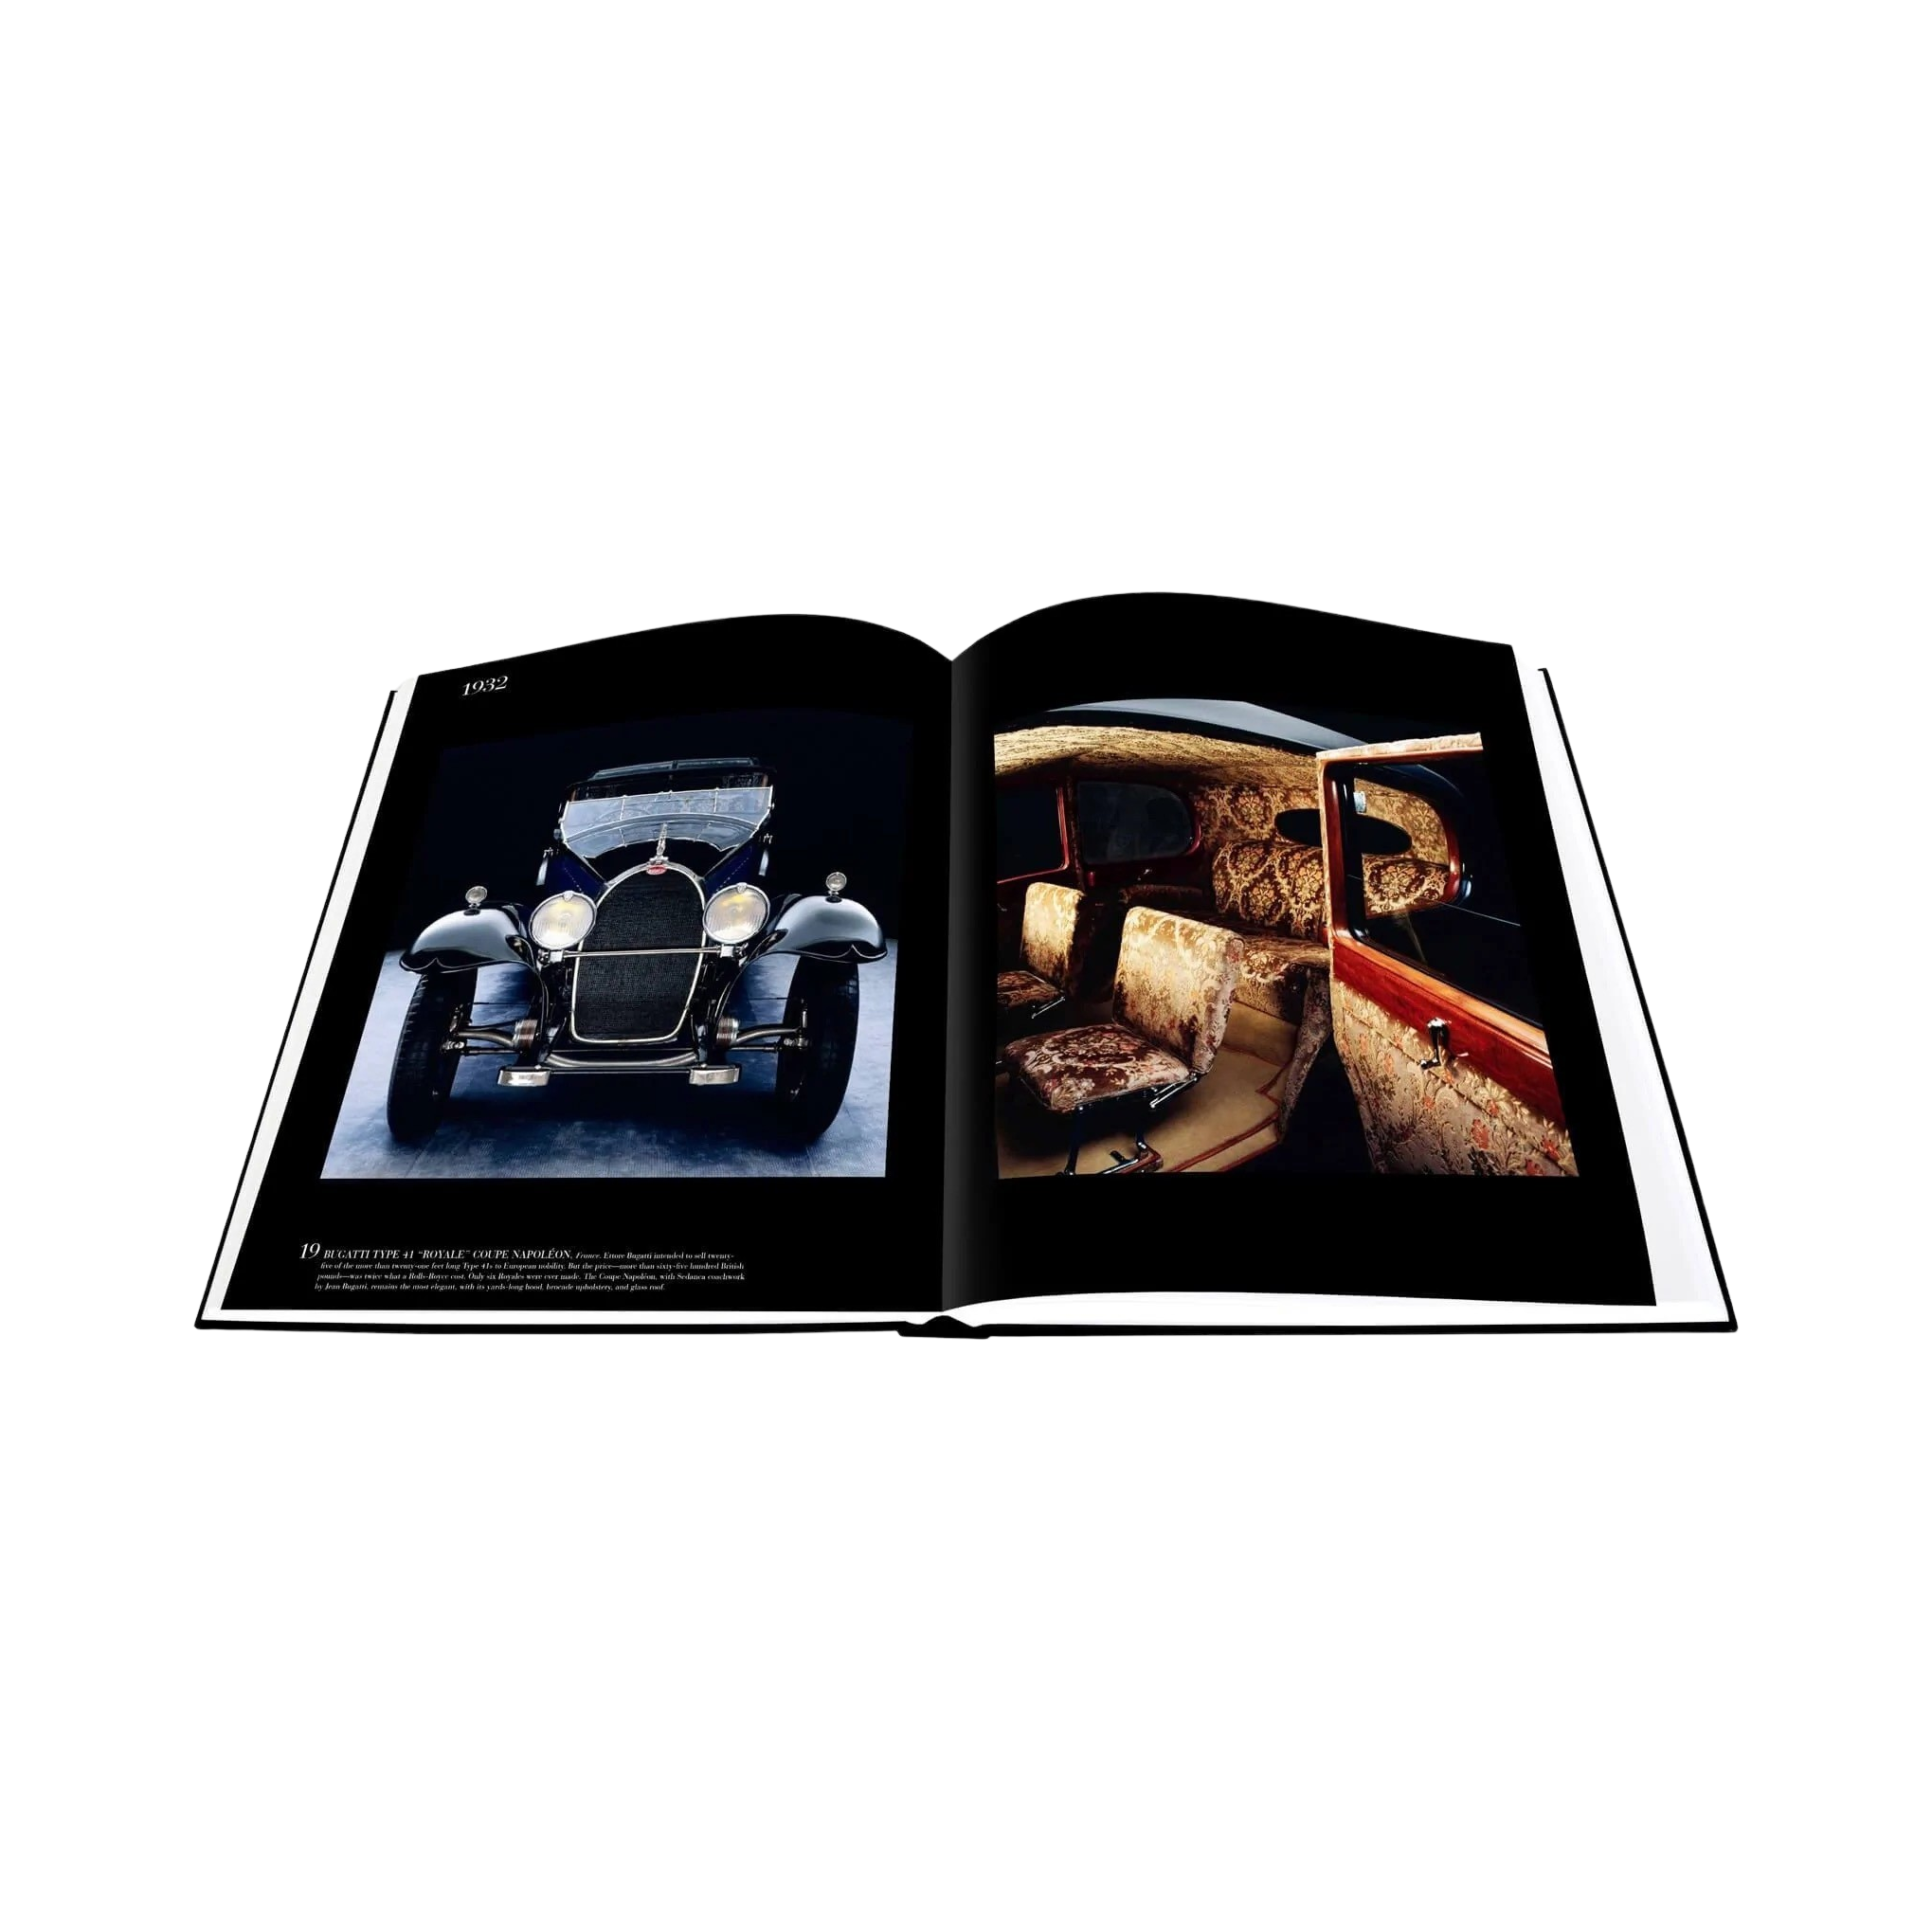 85122 Assouline The Impossible Collection of Cars Coffee table book